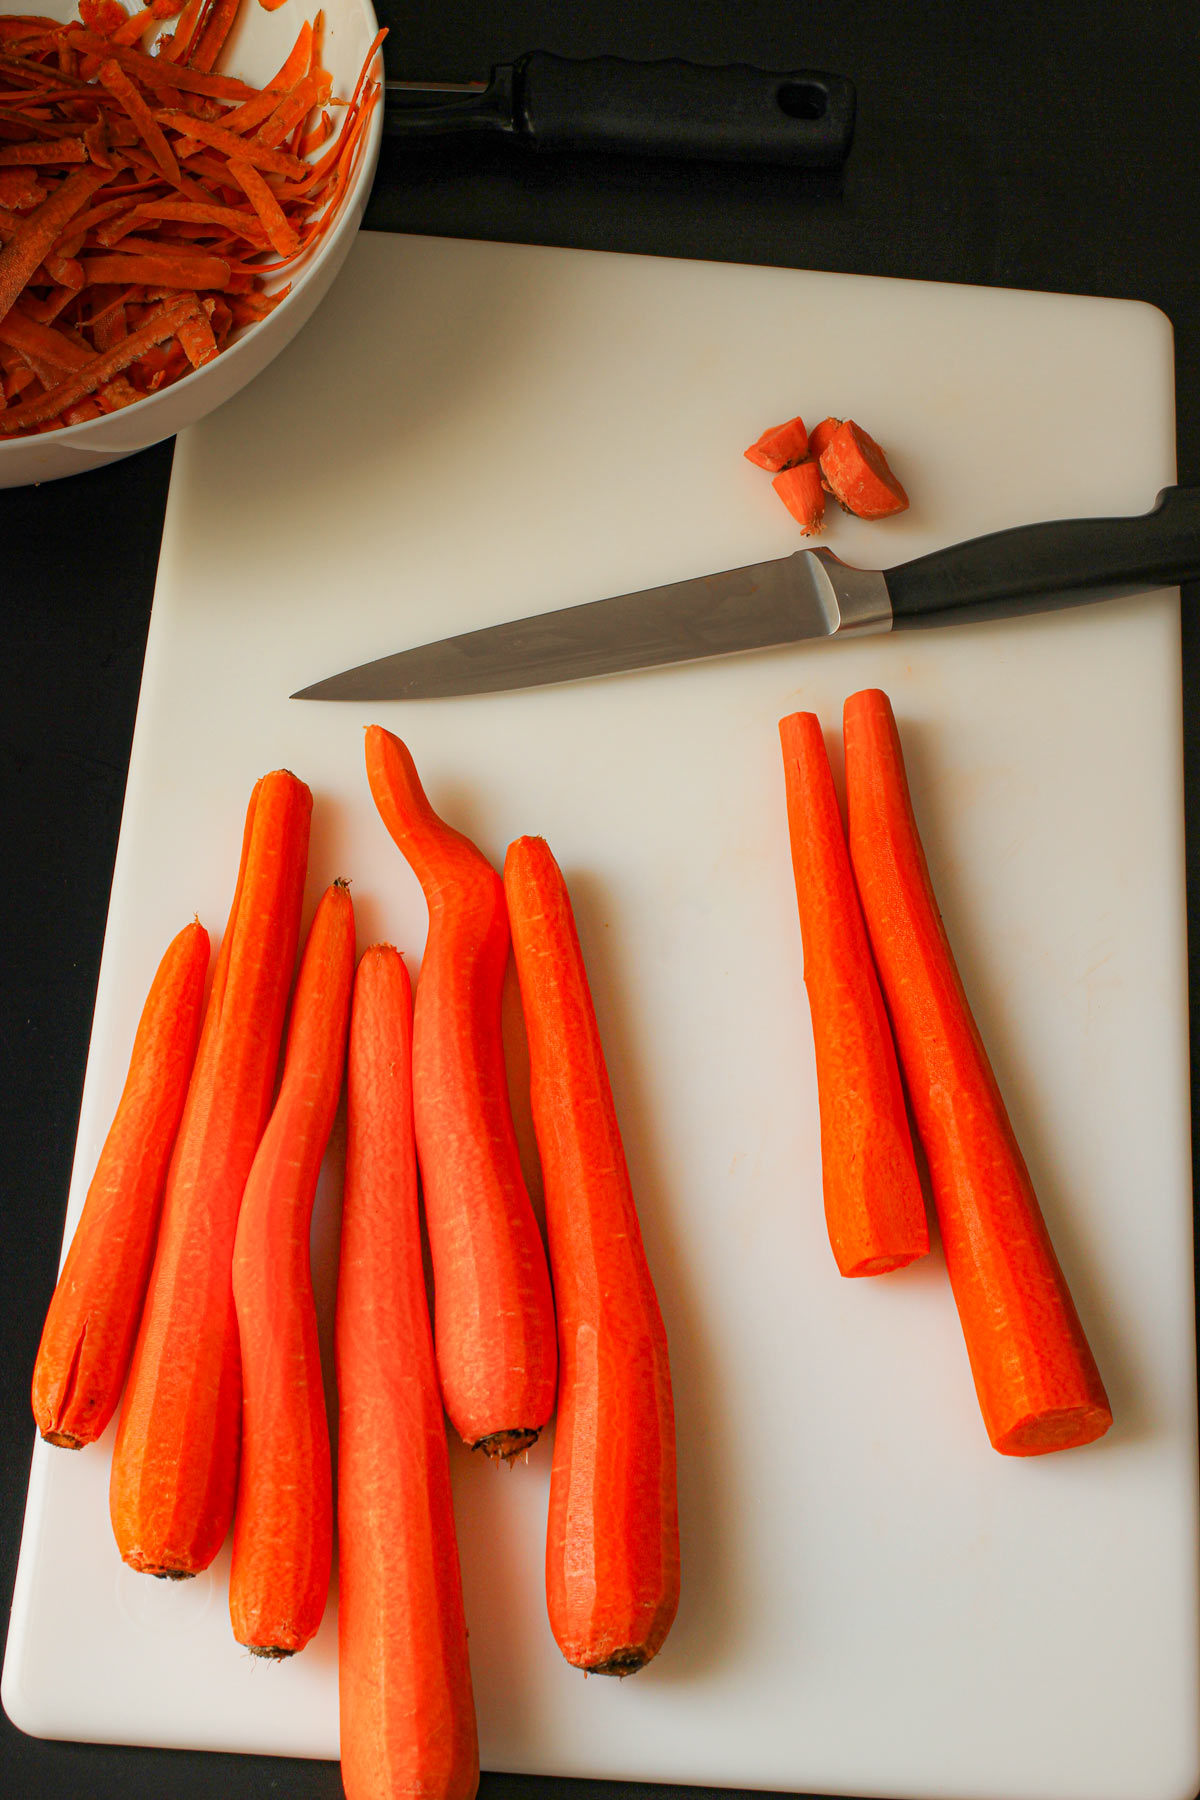 cutting the ends off peeled carrots on a white cutting board.